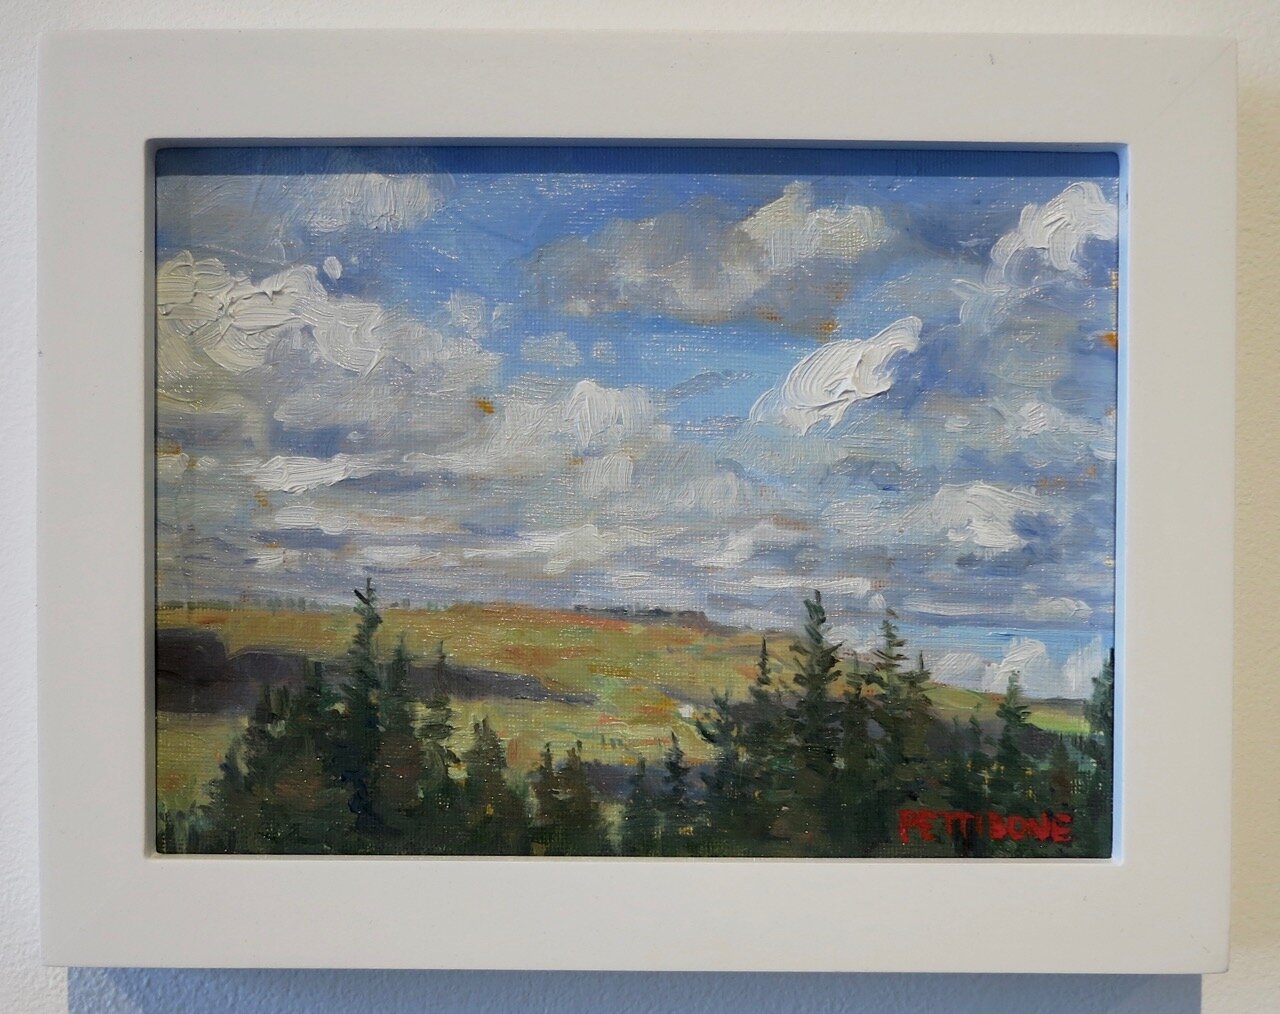    Crisp Afternoon Sky , 2020   Oil on canvas  6x8 inches 